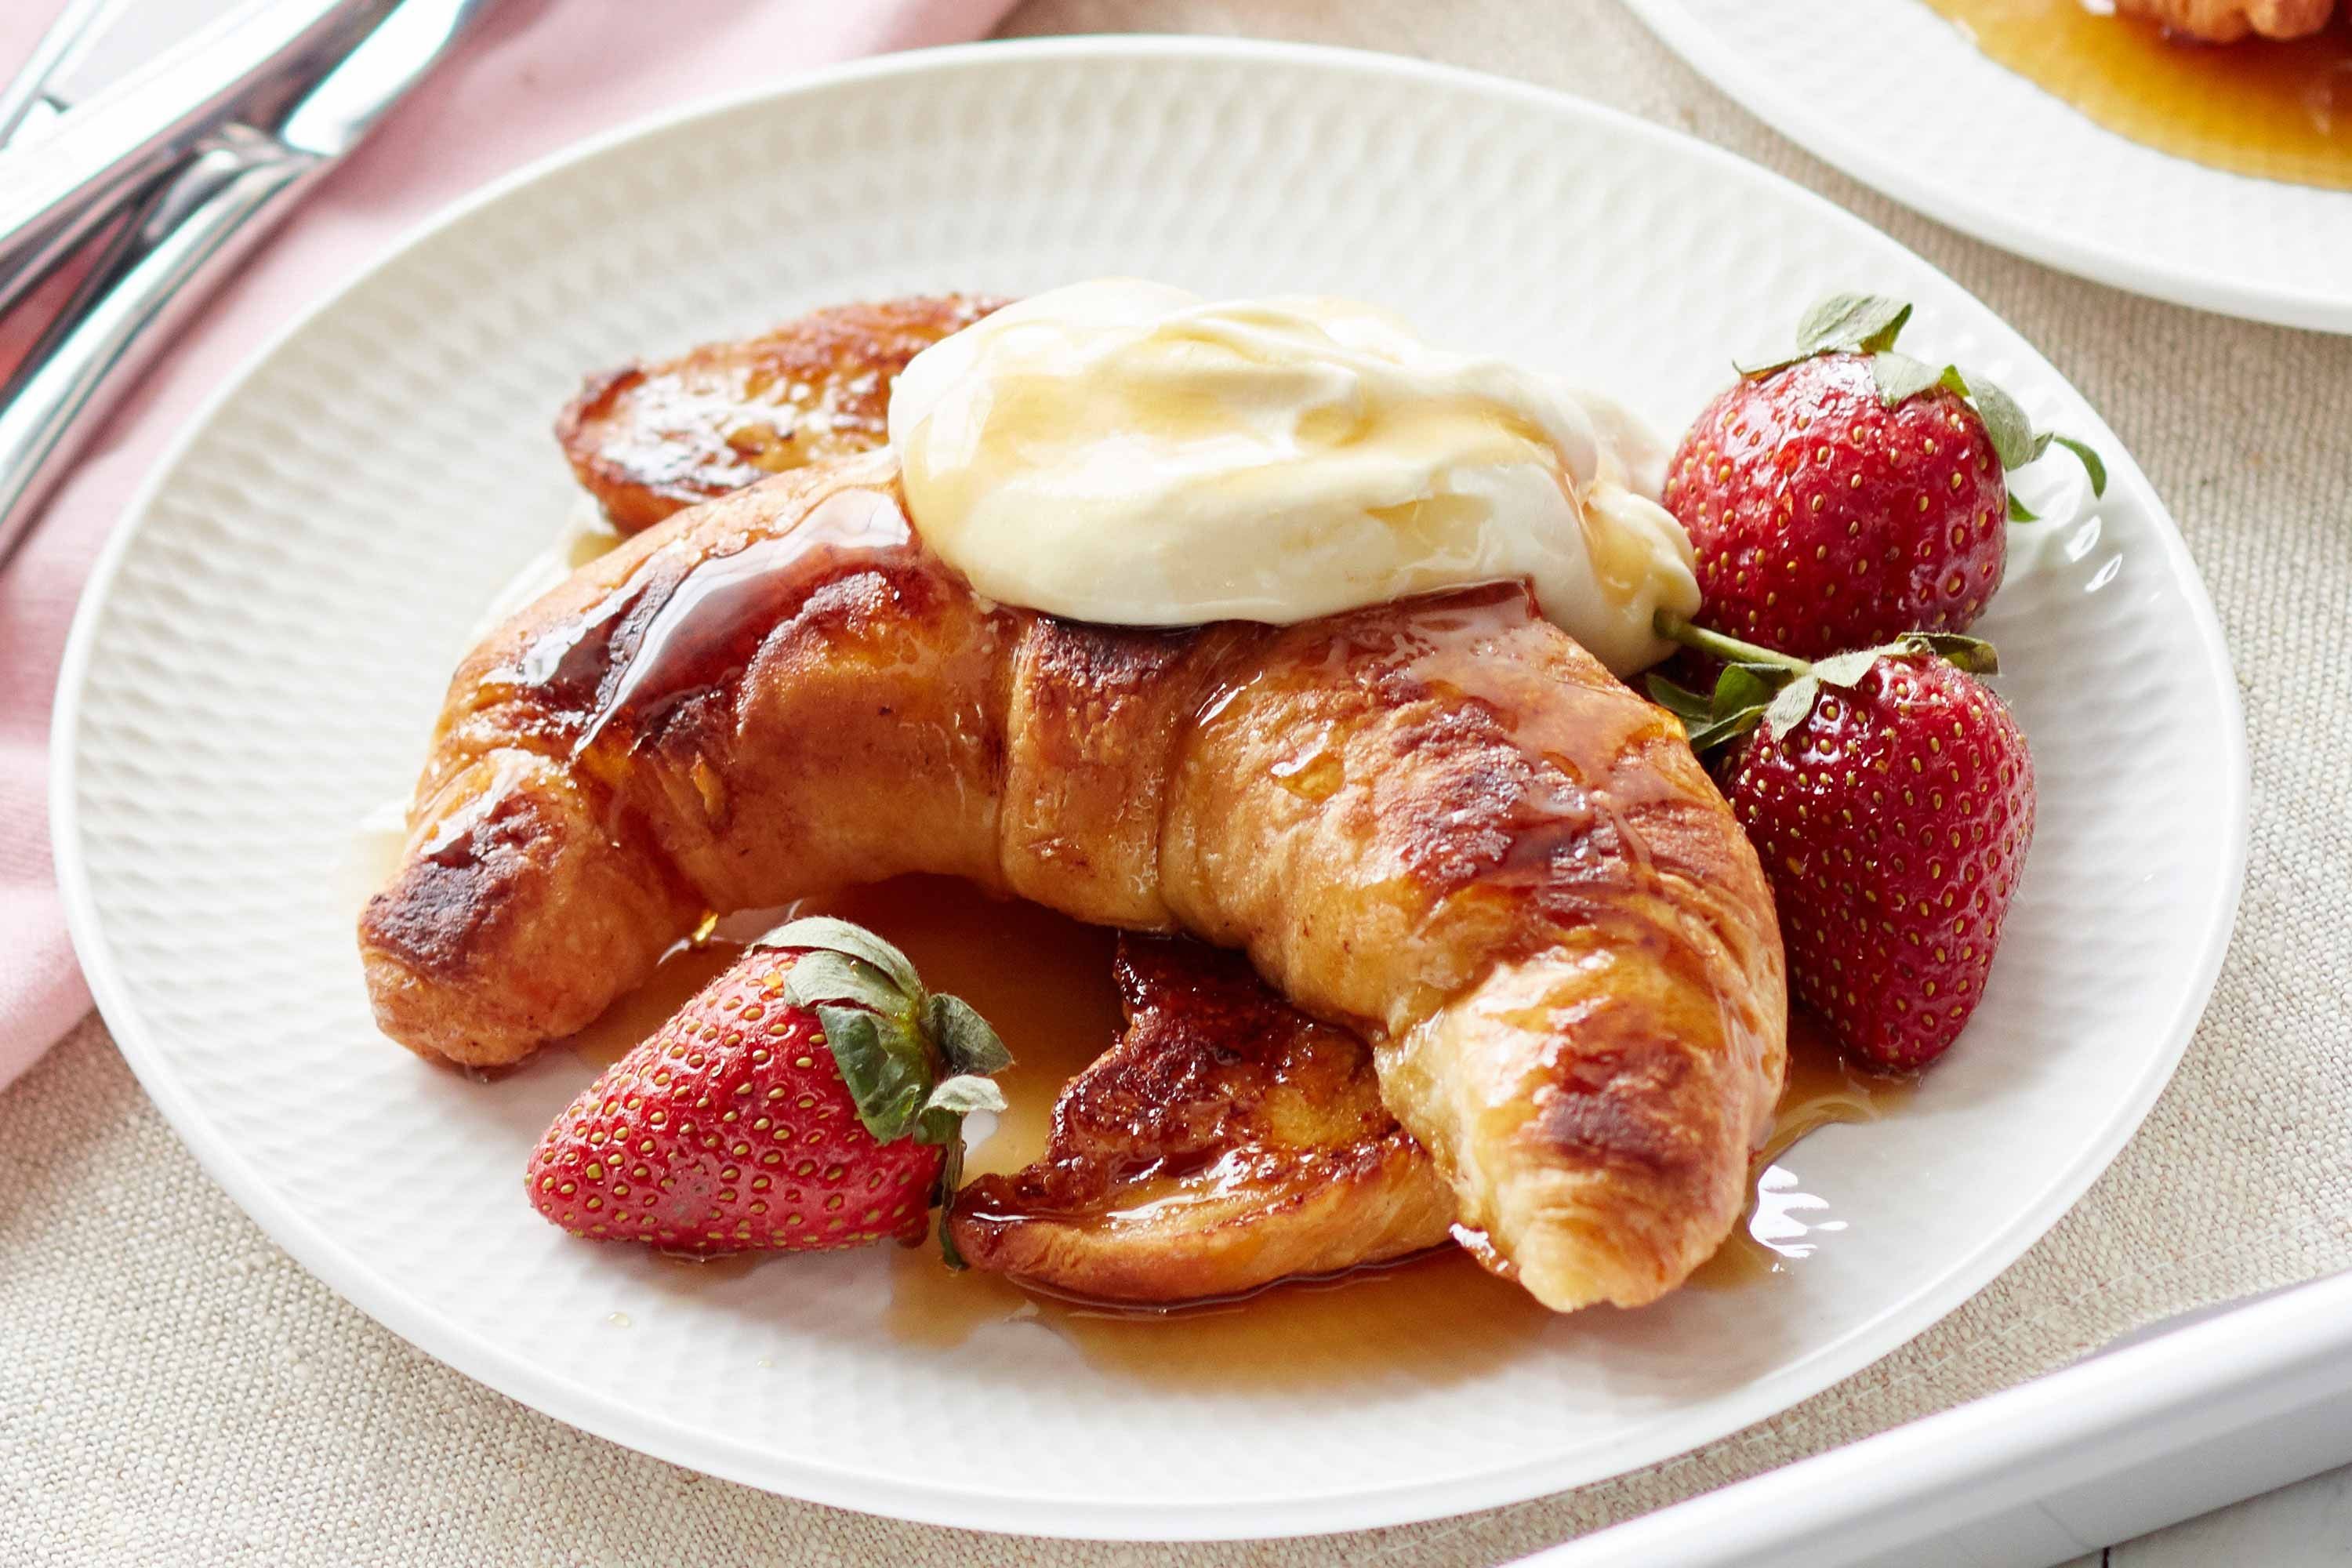 Can We Guess Your Zodiac Sign by Your Taste in Food? Quiz croissant french toast with strawberries 110787 1